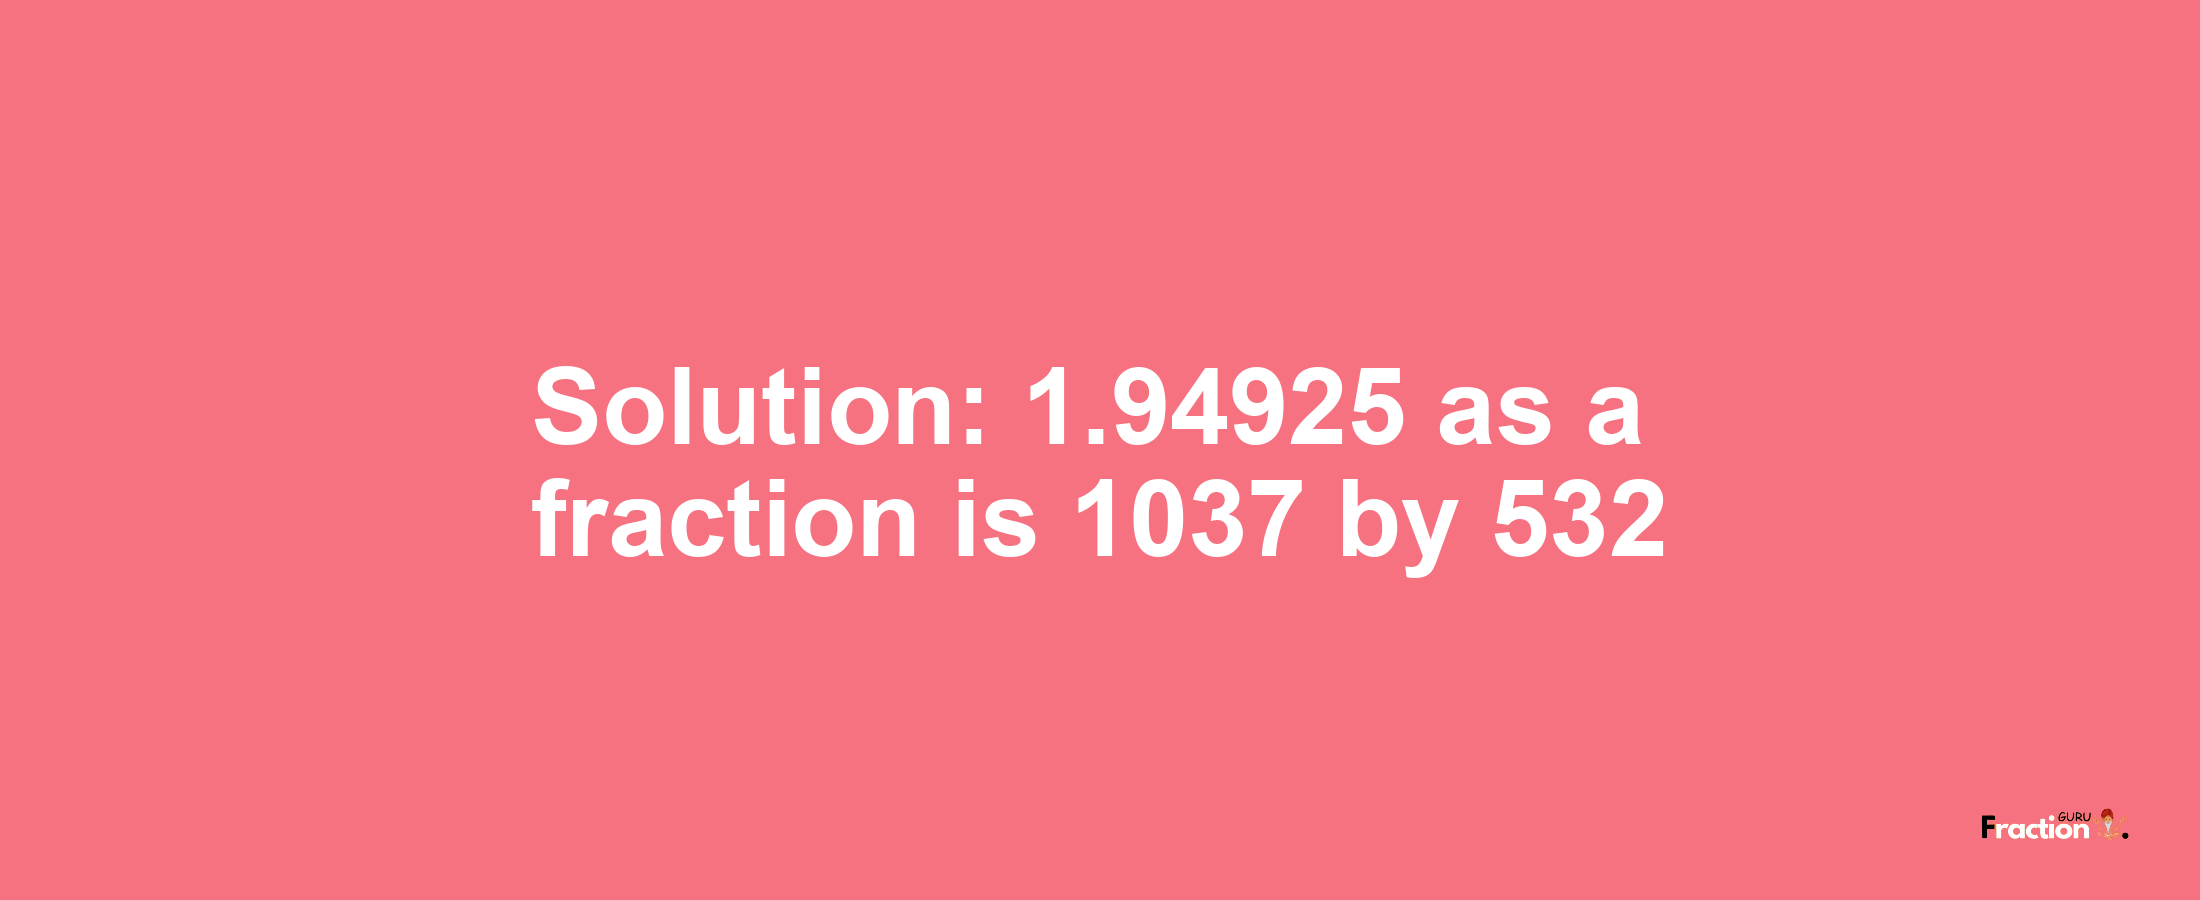 Solution:1.94925 as a fraction is 1037/532